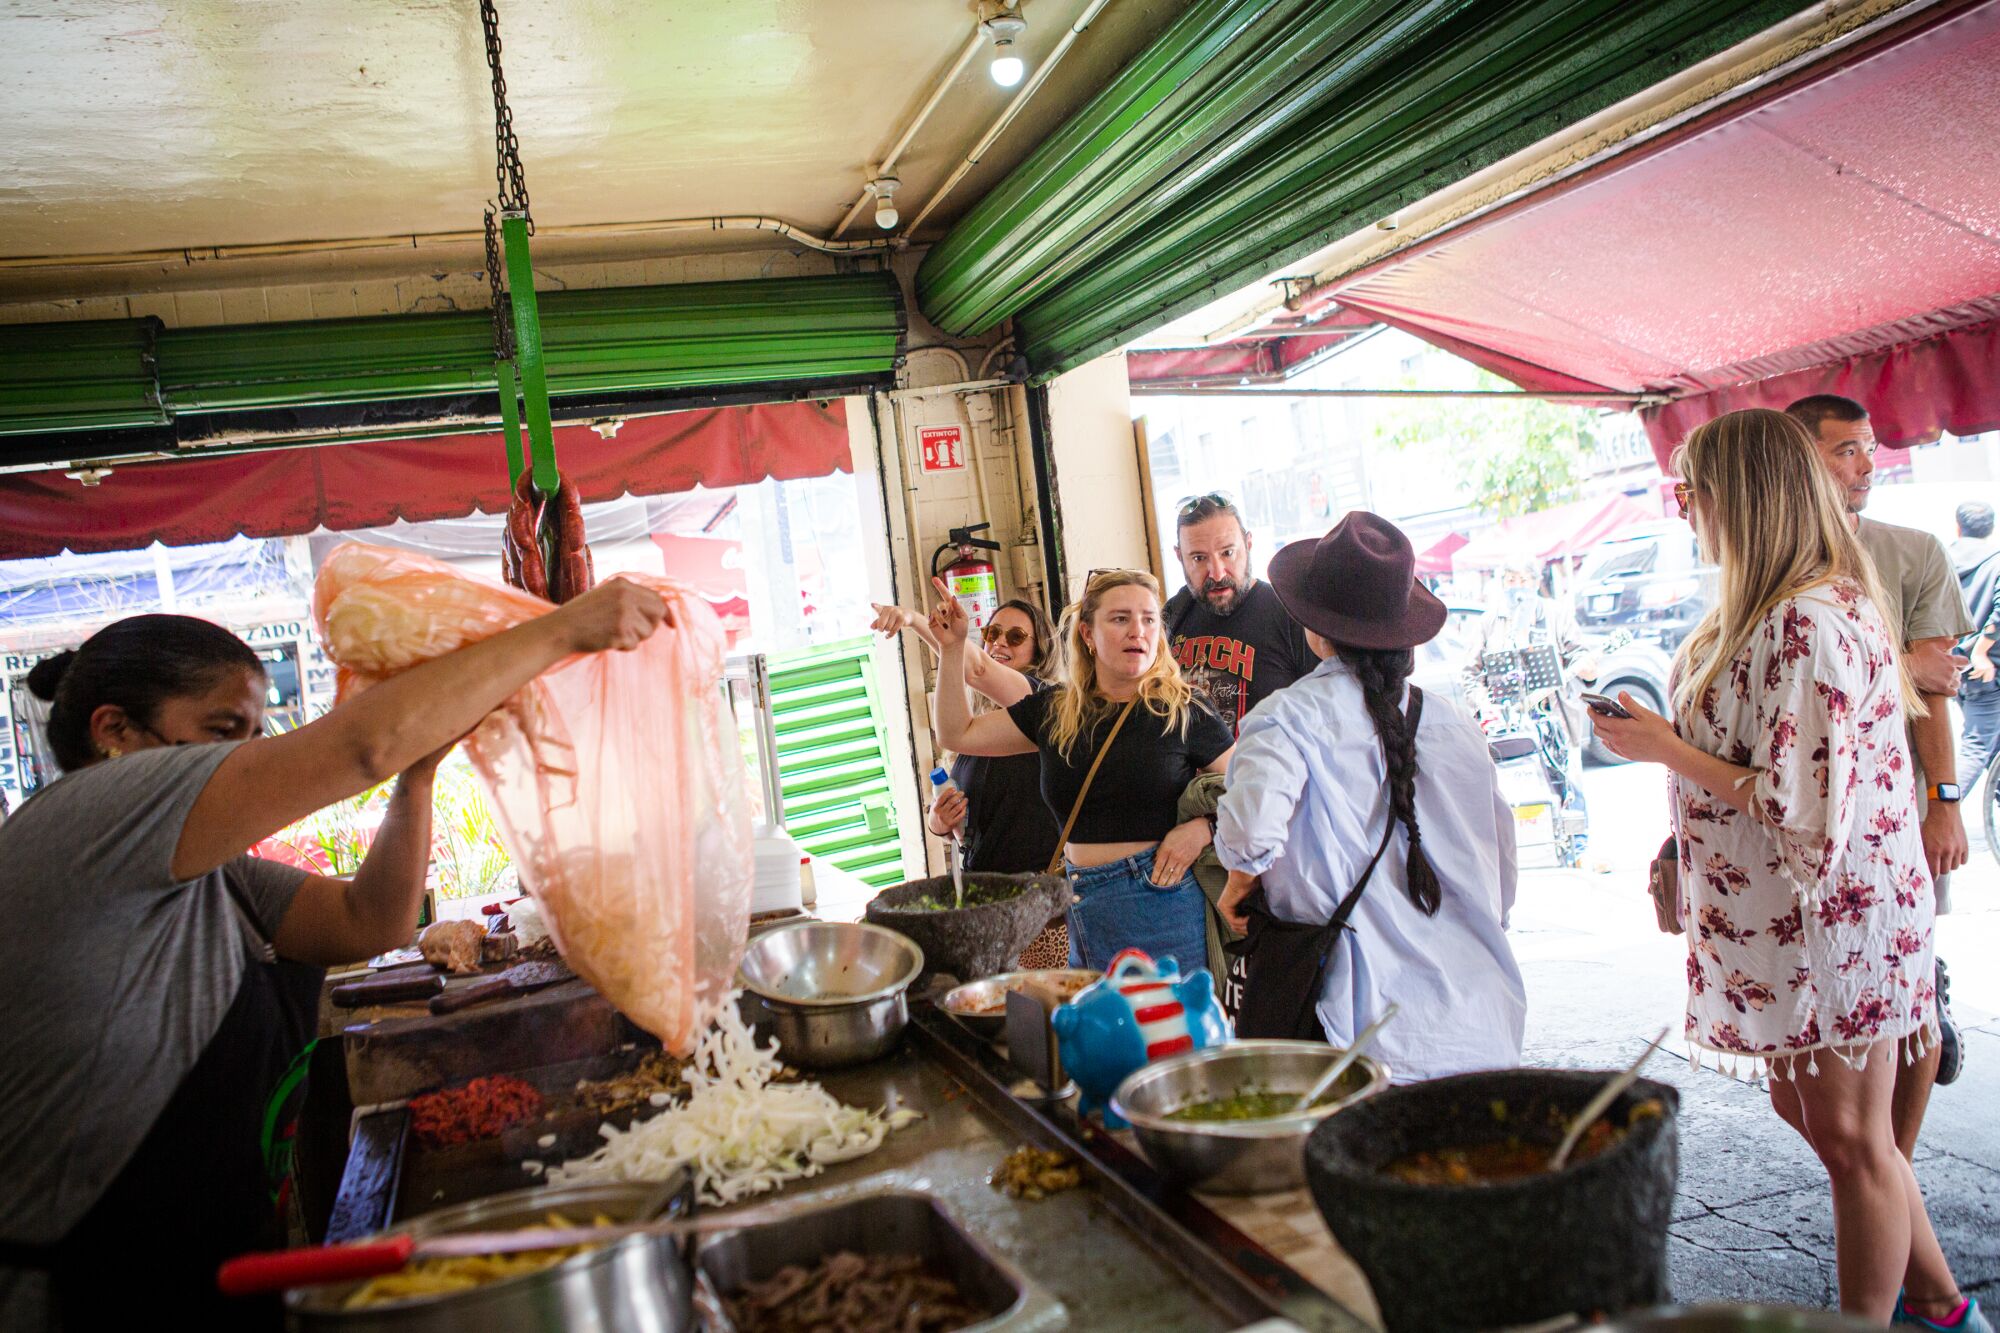 Customers gather at Ricos Tacos Toluca as a cook pours ingredients from a plastic bag, 